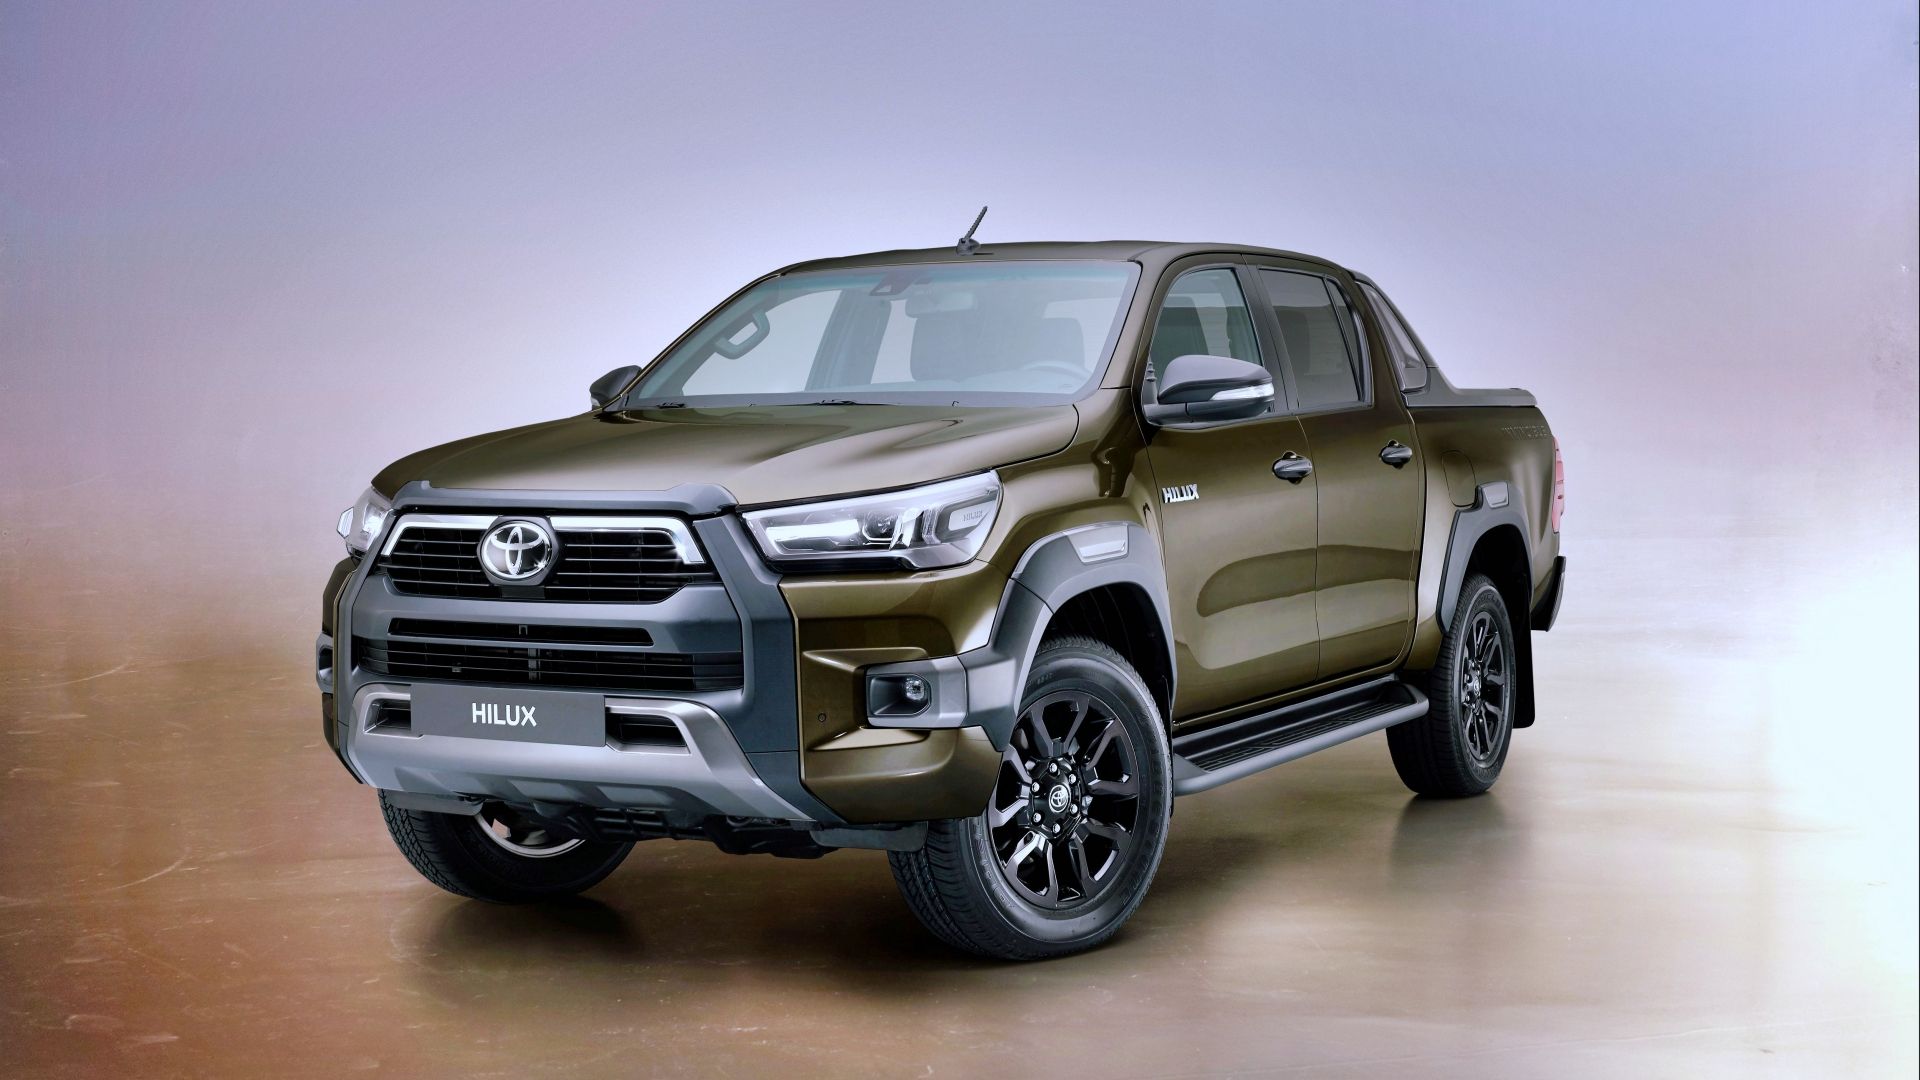 The Real Reason Why Toyota Hilux Is Banned For Sale In America